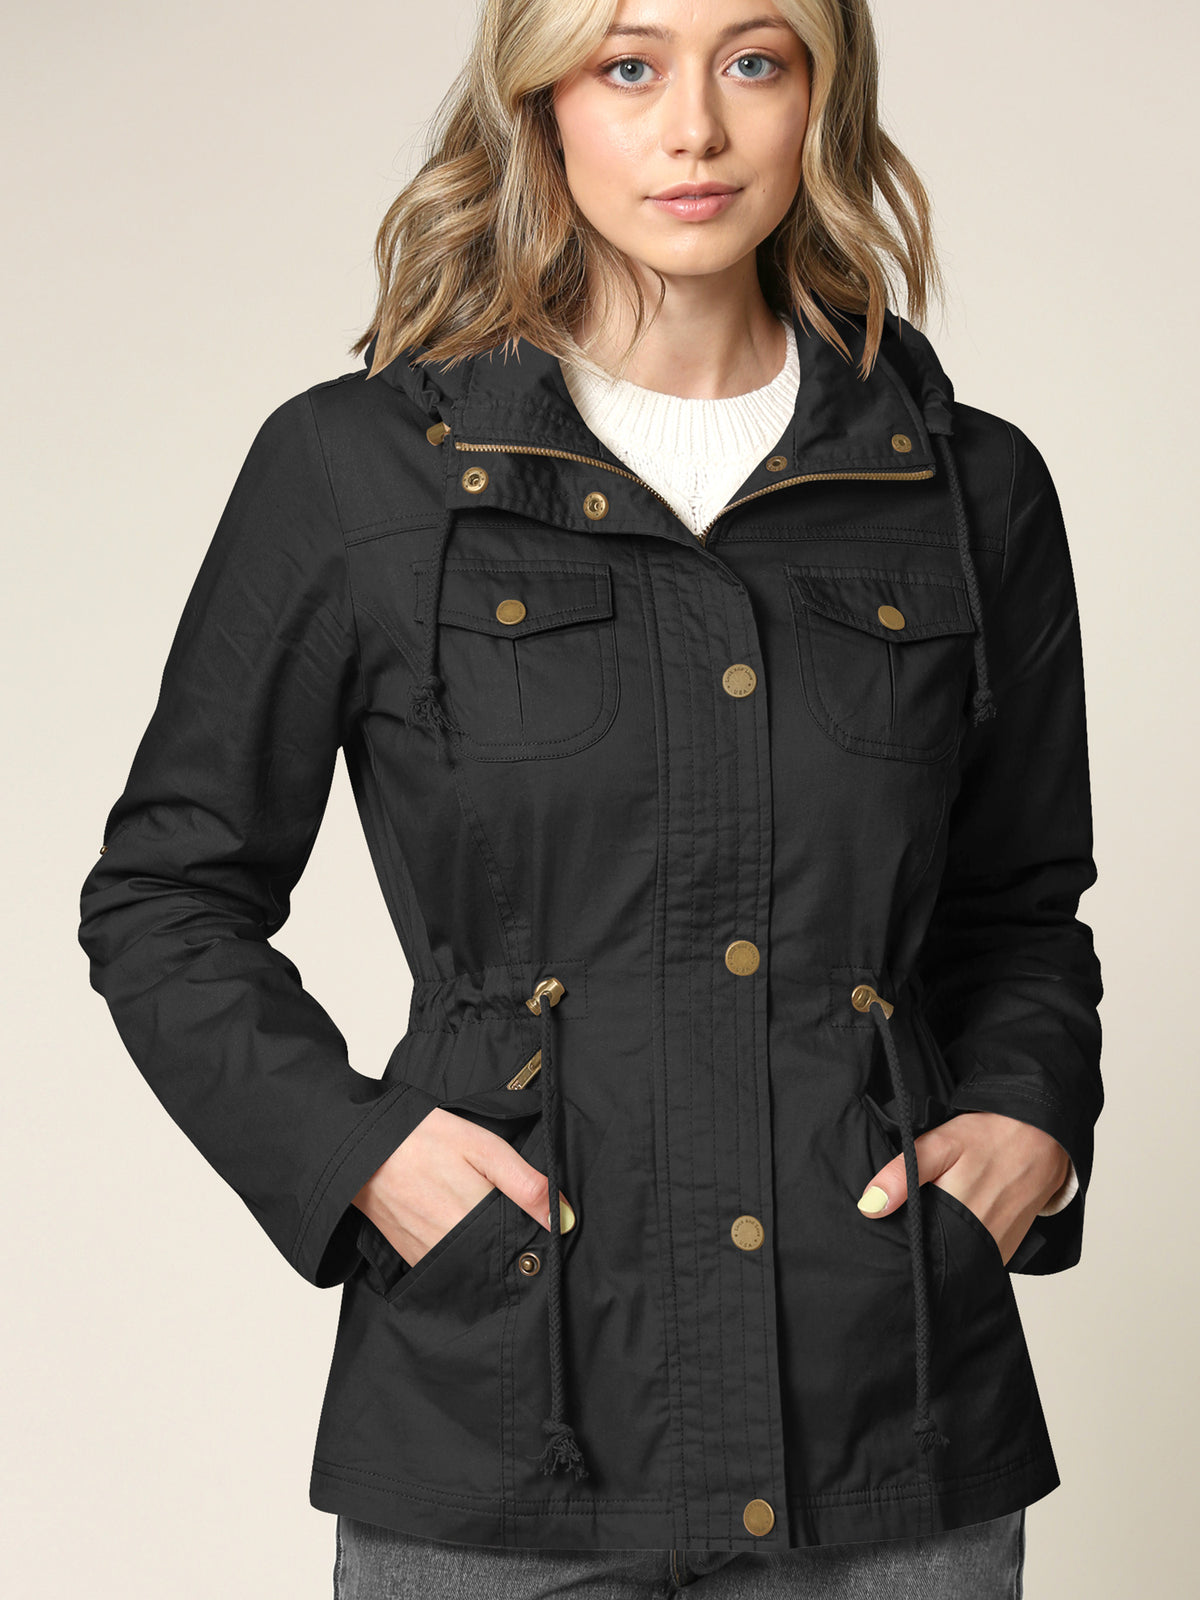 Vintage Style Women's Casual Military Jacket with Hoodie